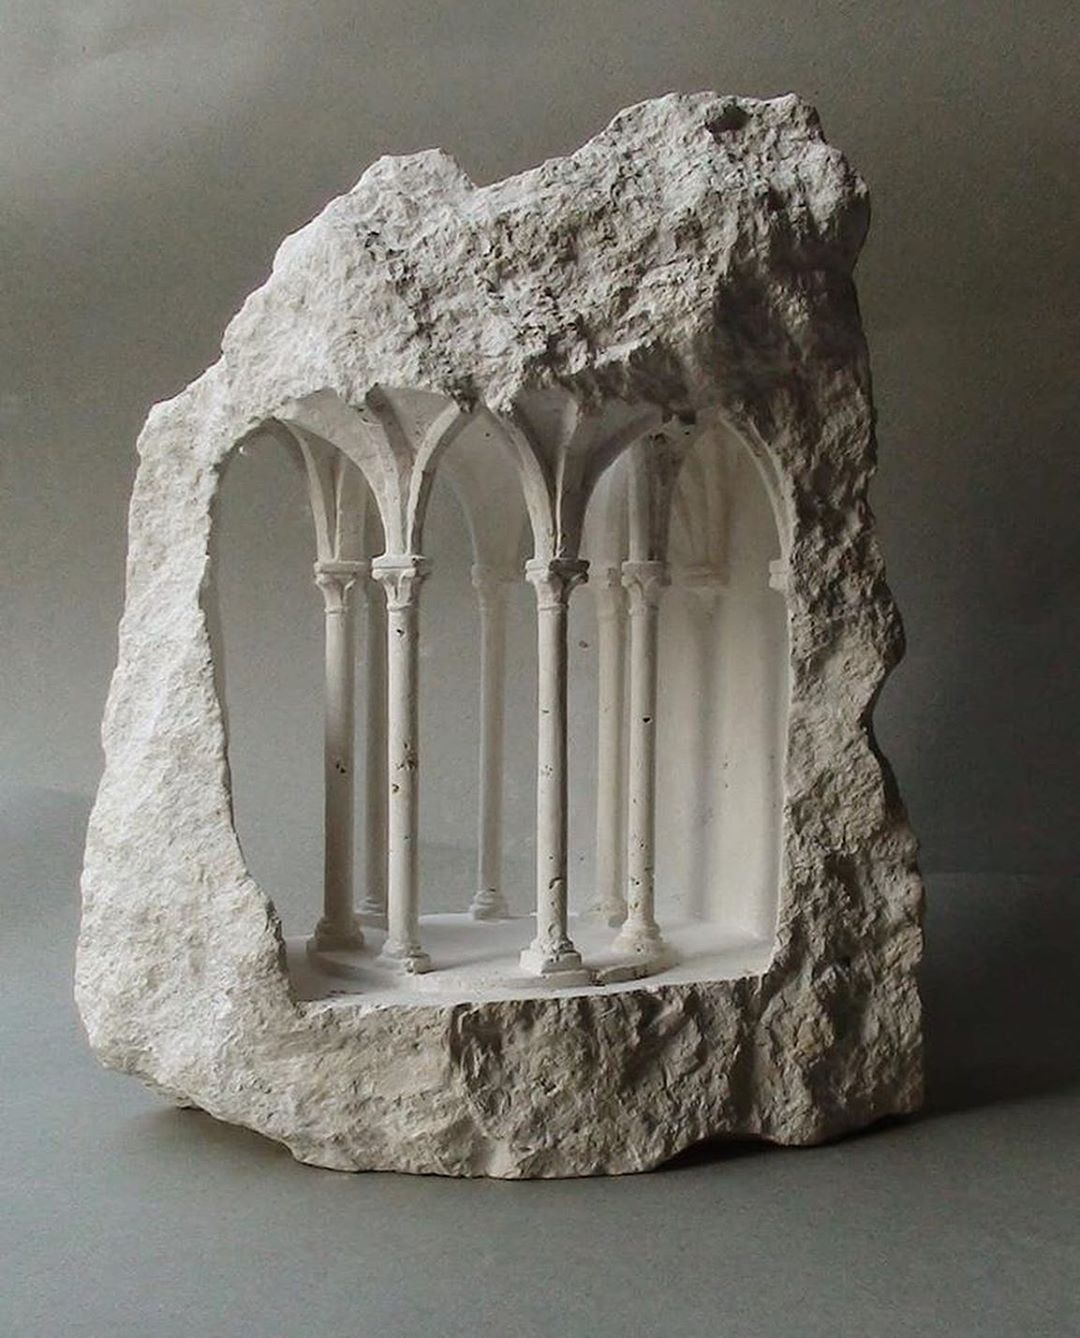 Classical Architecture Carved Into Stones And Marble Blocks By Matthew Simmonds 23